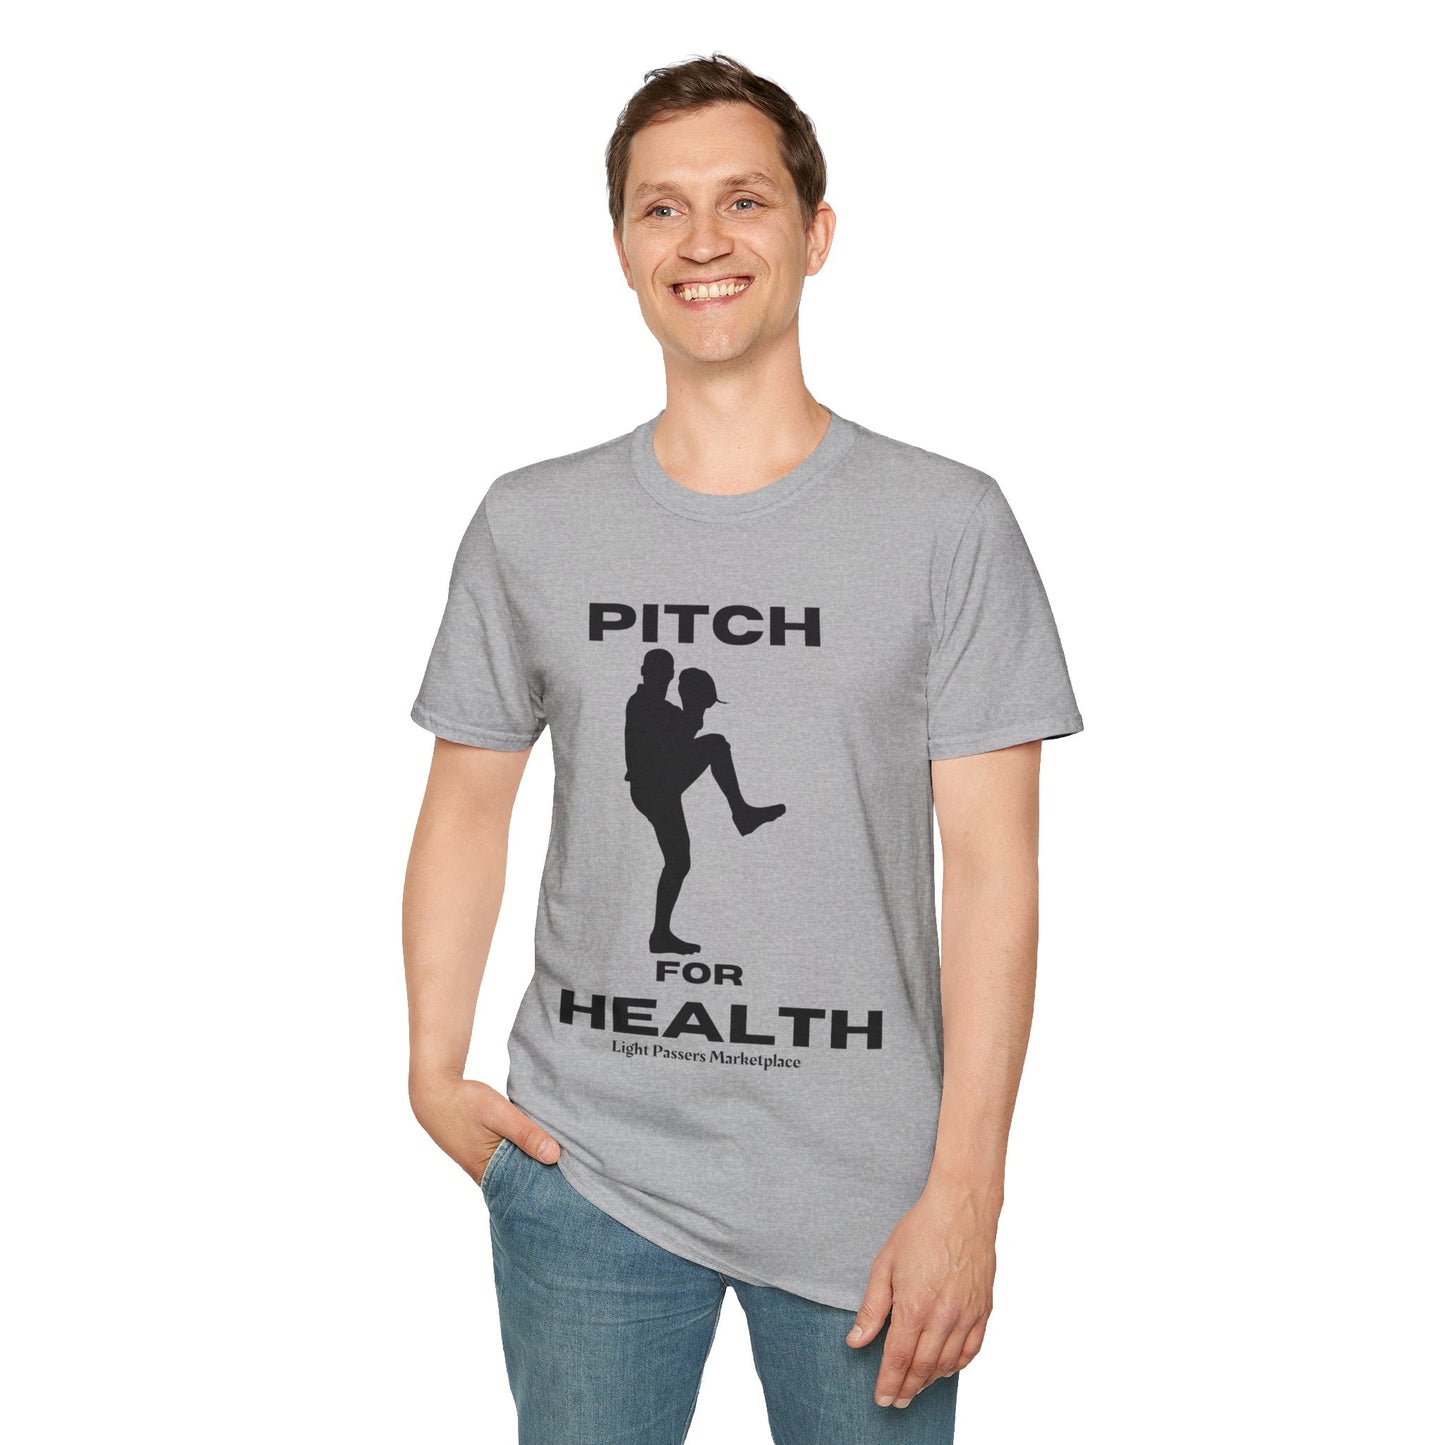 Light Passers Marketplace Pitch for Health Unisex Soft T-Shirt Fitness